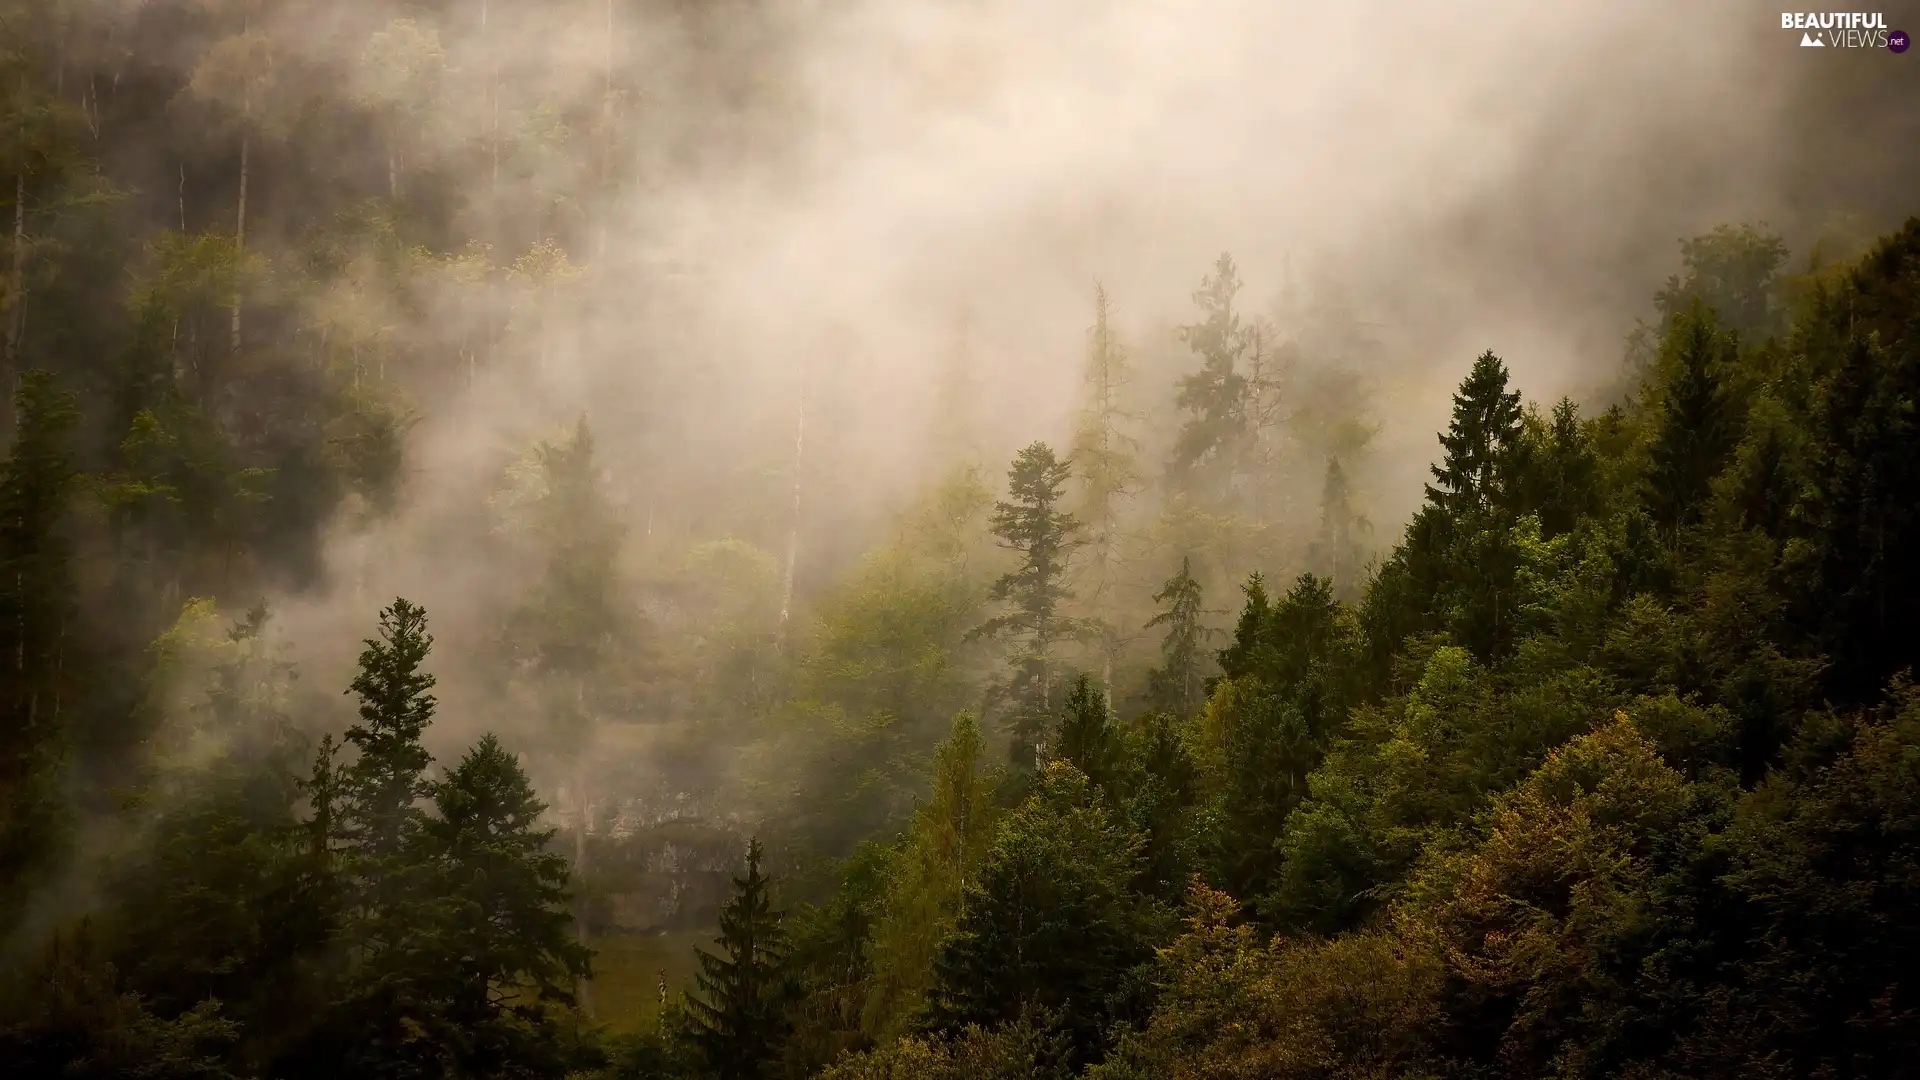 viewes, Fog, forest, trees, hazy